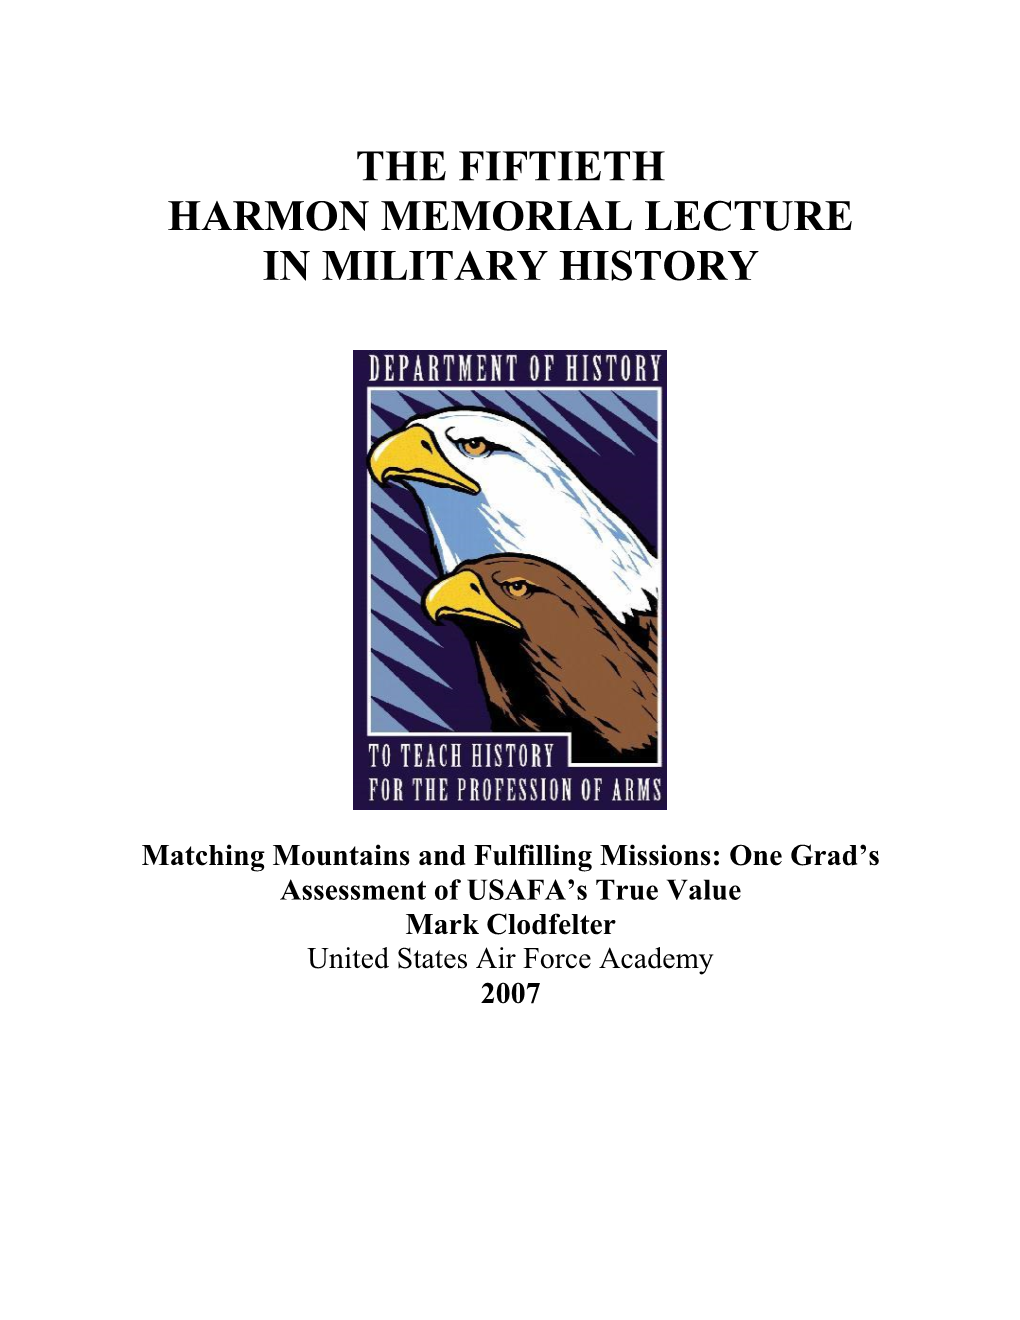 The Fiftieth Harmon Memorial Lecture in Military History